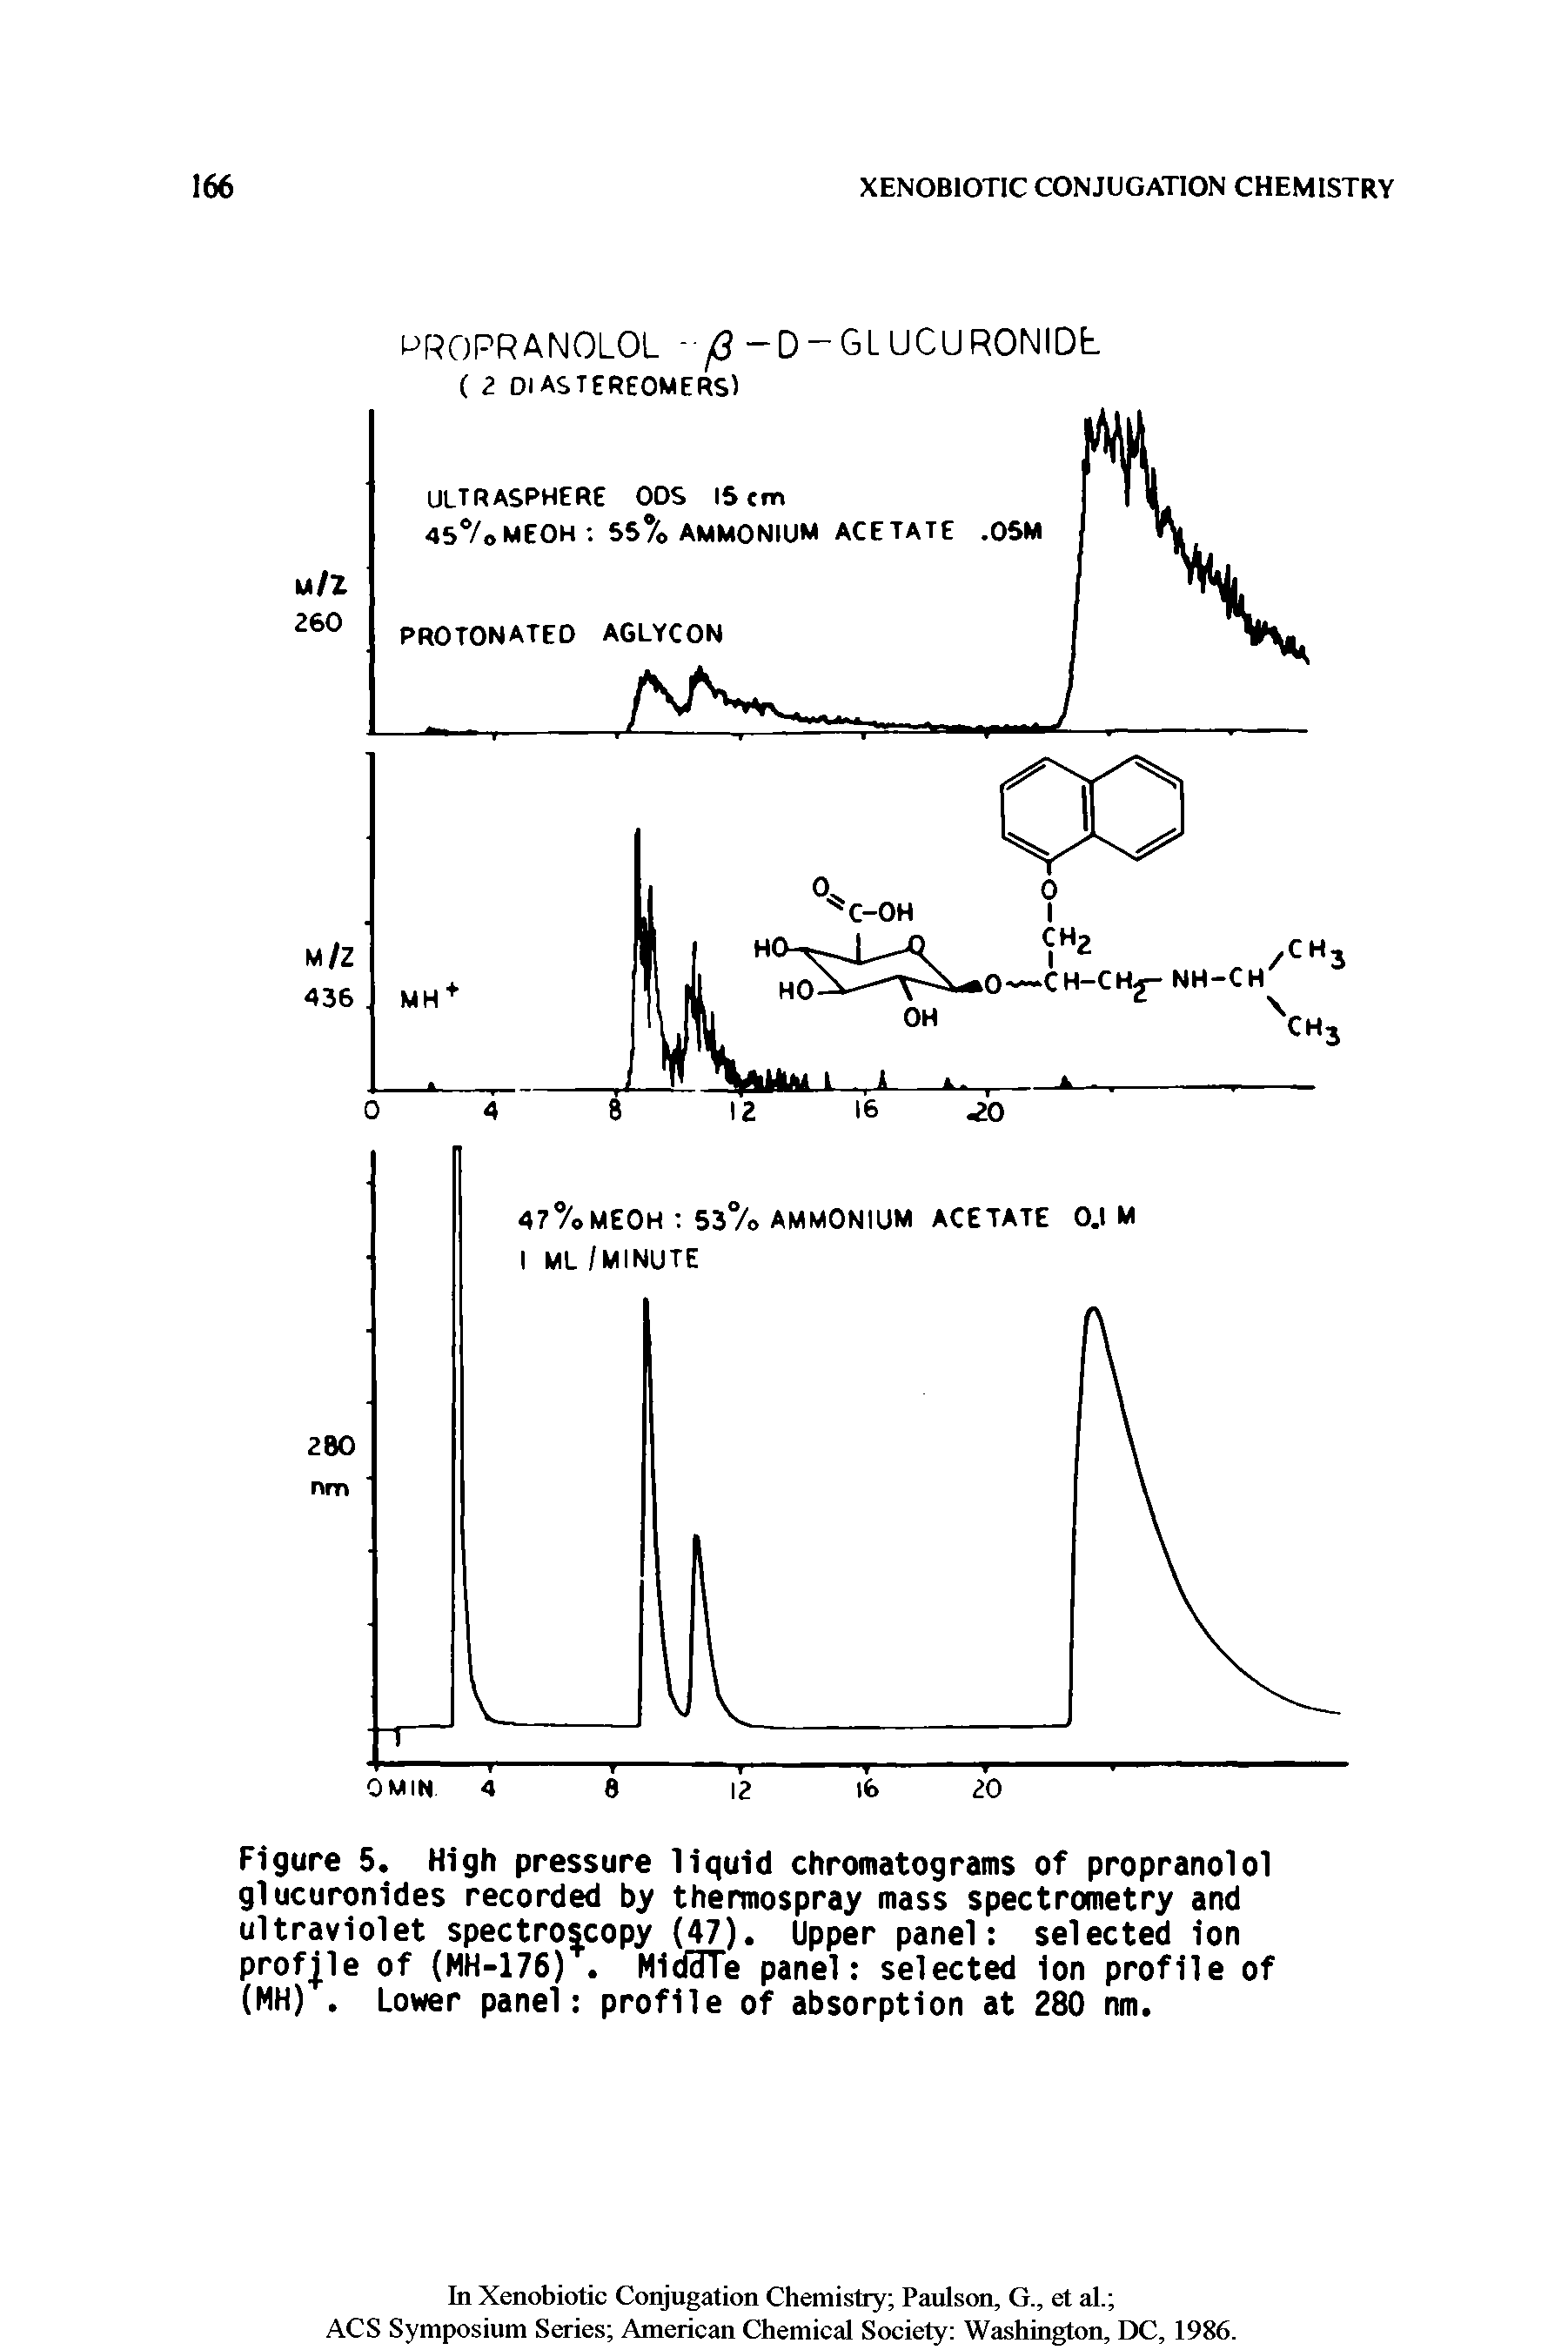 Figure 5. High pressure liquid chromatograms of propranolol glucuronldes recorded by thermospray mass spectrometry and ultraviolet spectroscopy (47). Upper panel selected ion profjle of (MH-176). MidcTTe panel selected ion profile of (MH). Lower panel profile of absorption at 280 nm.